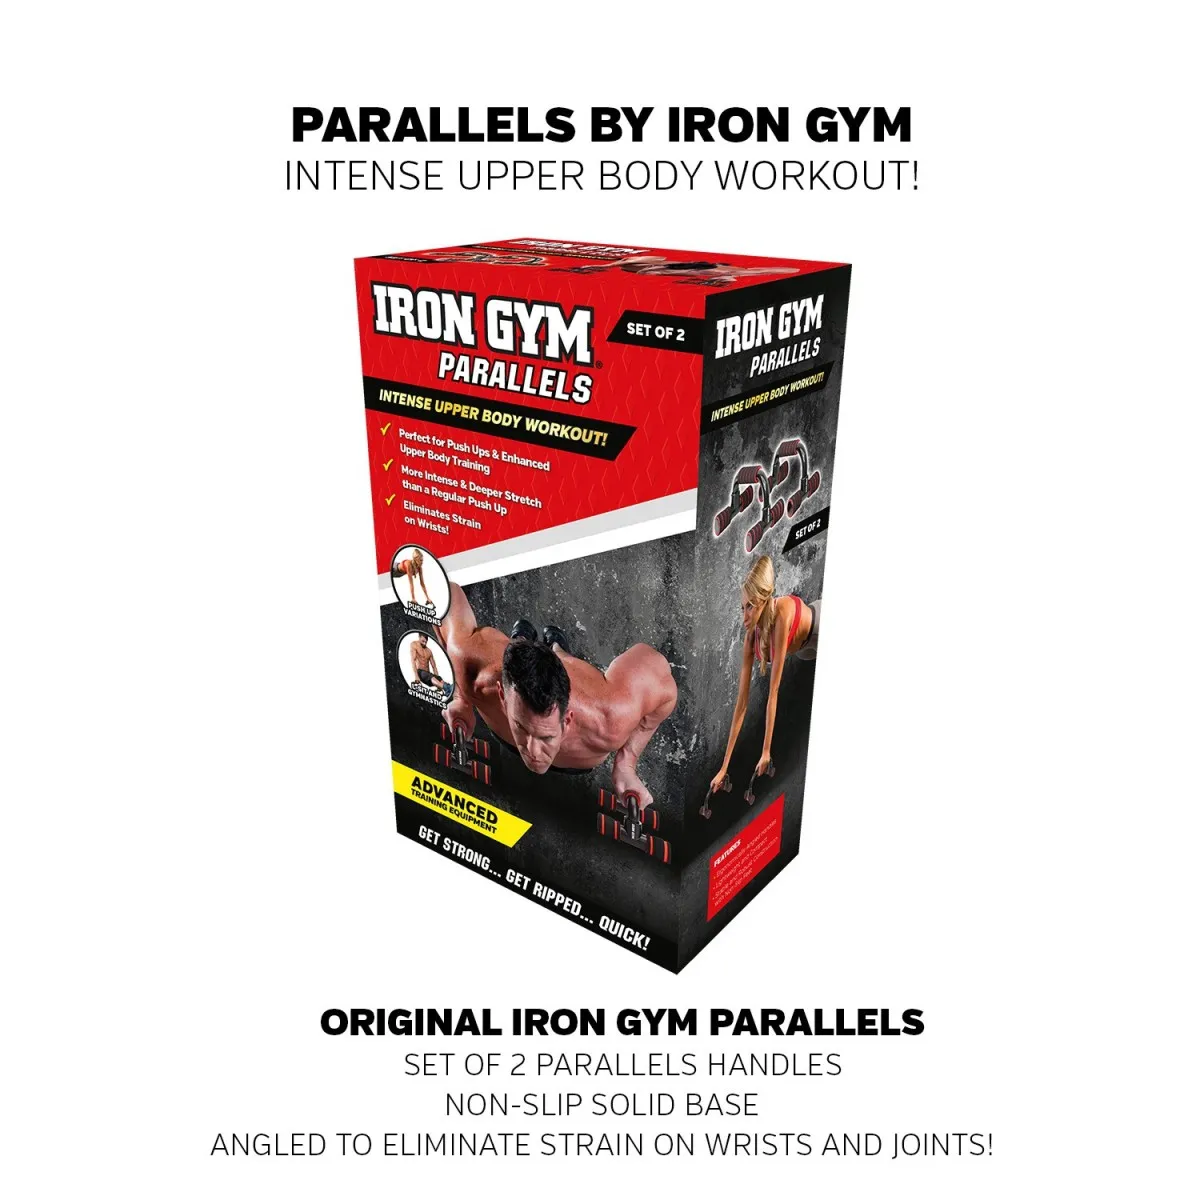 Iron Gym Parallels push-up grips